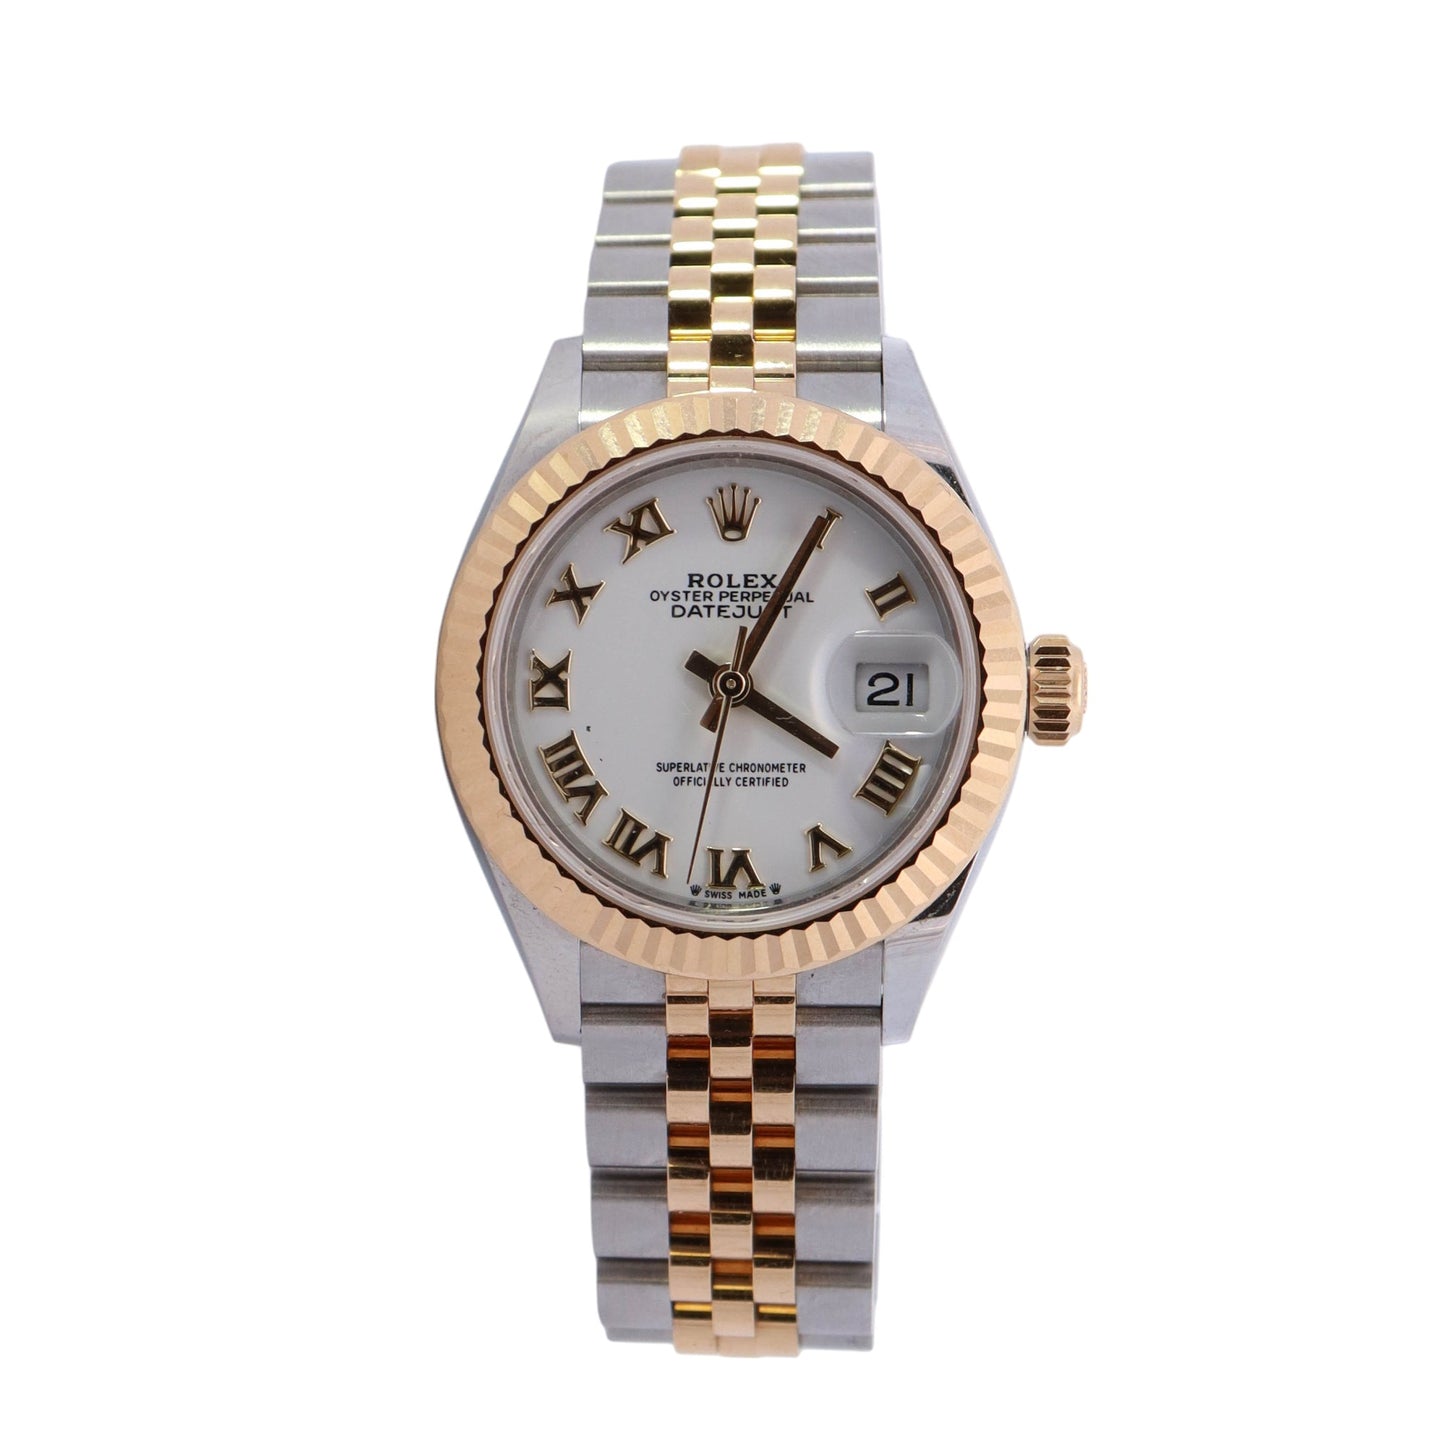 Rolex Datejust Two Tone Stainless Steel & Yellow Gold 28mm White Roman Dial Watch Reference #: 279173 - Happy Jewelers Fine Jewelry Lifetime Warranty